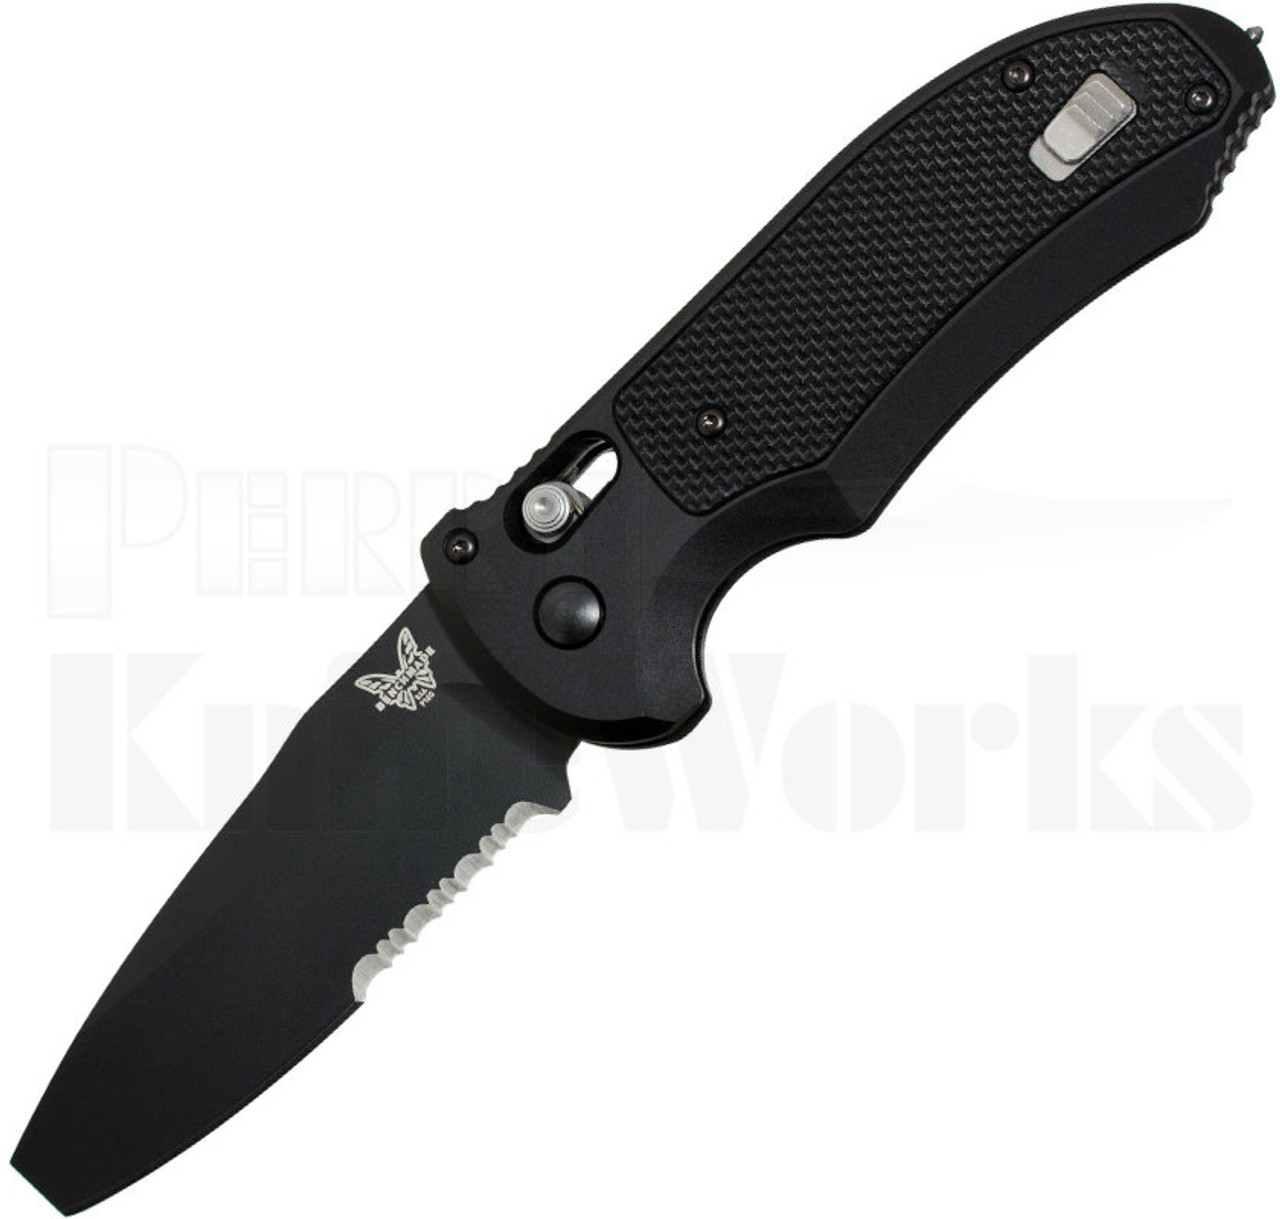 Benchmade Triage Automatic Knife 9160SBK Blunt Tip l For Sale